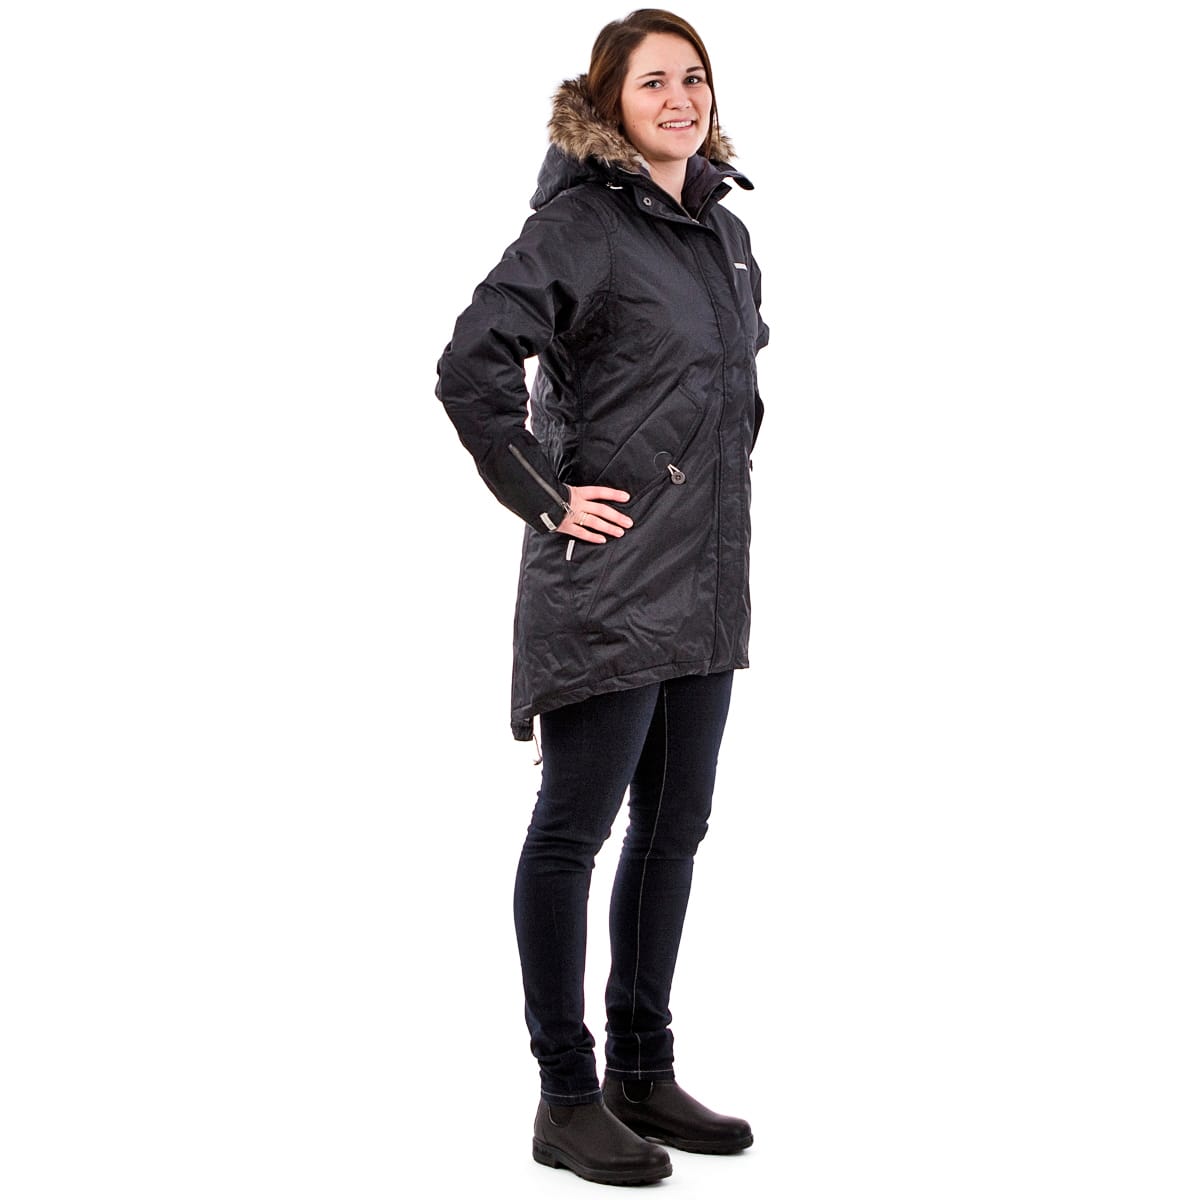 Buy Didriksons Lindsey Women's Parka from Outnorth